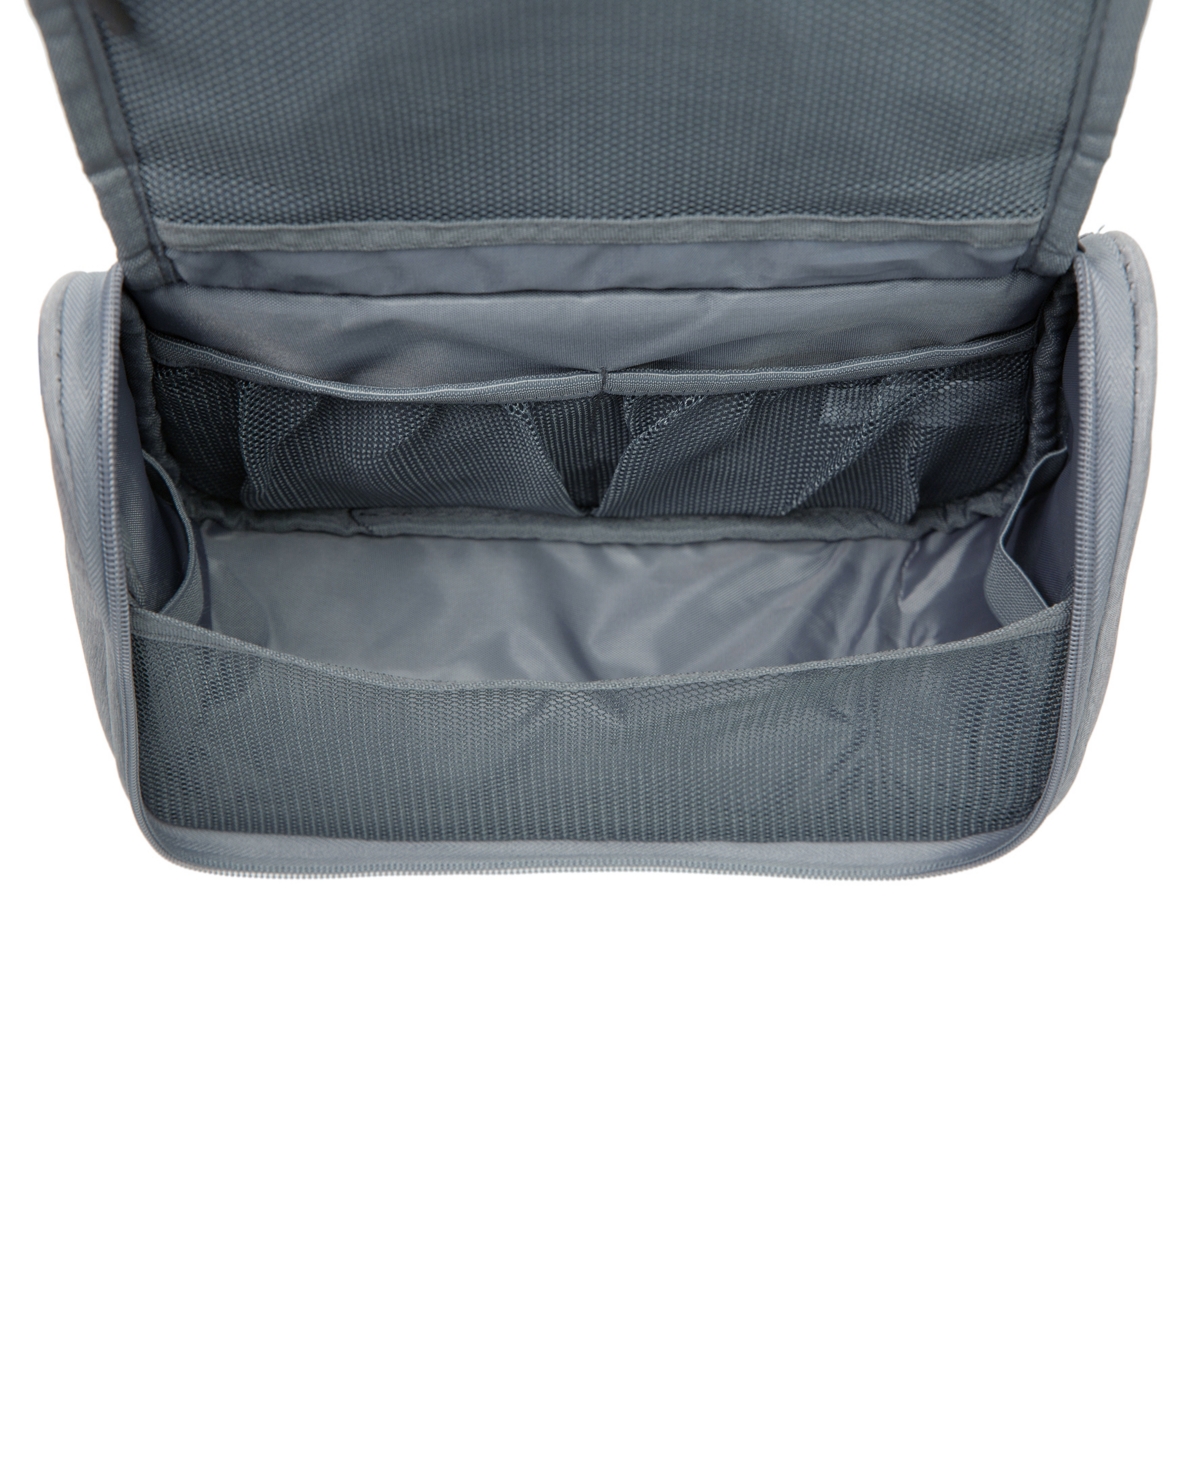 Shop Travelon World Travel Essentials Hanging Toiletry Case In Peacock Te